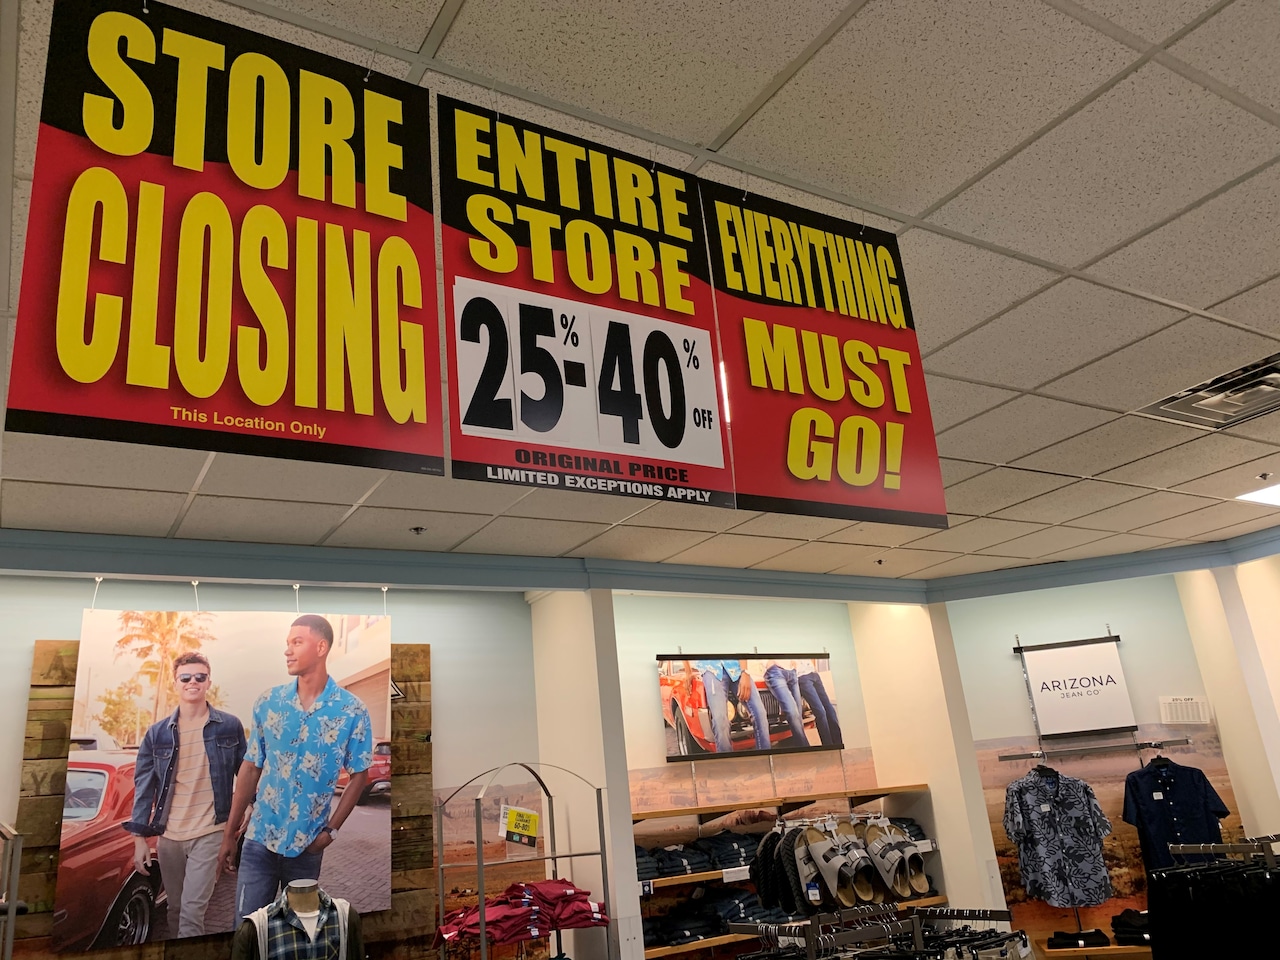 Rue 21 announces plans to close all 540 stores after filing for bankruptcy again [Video]